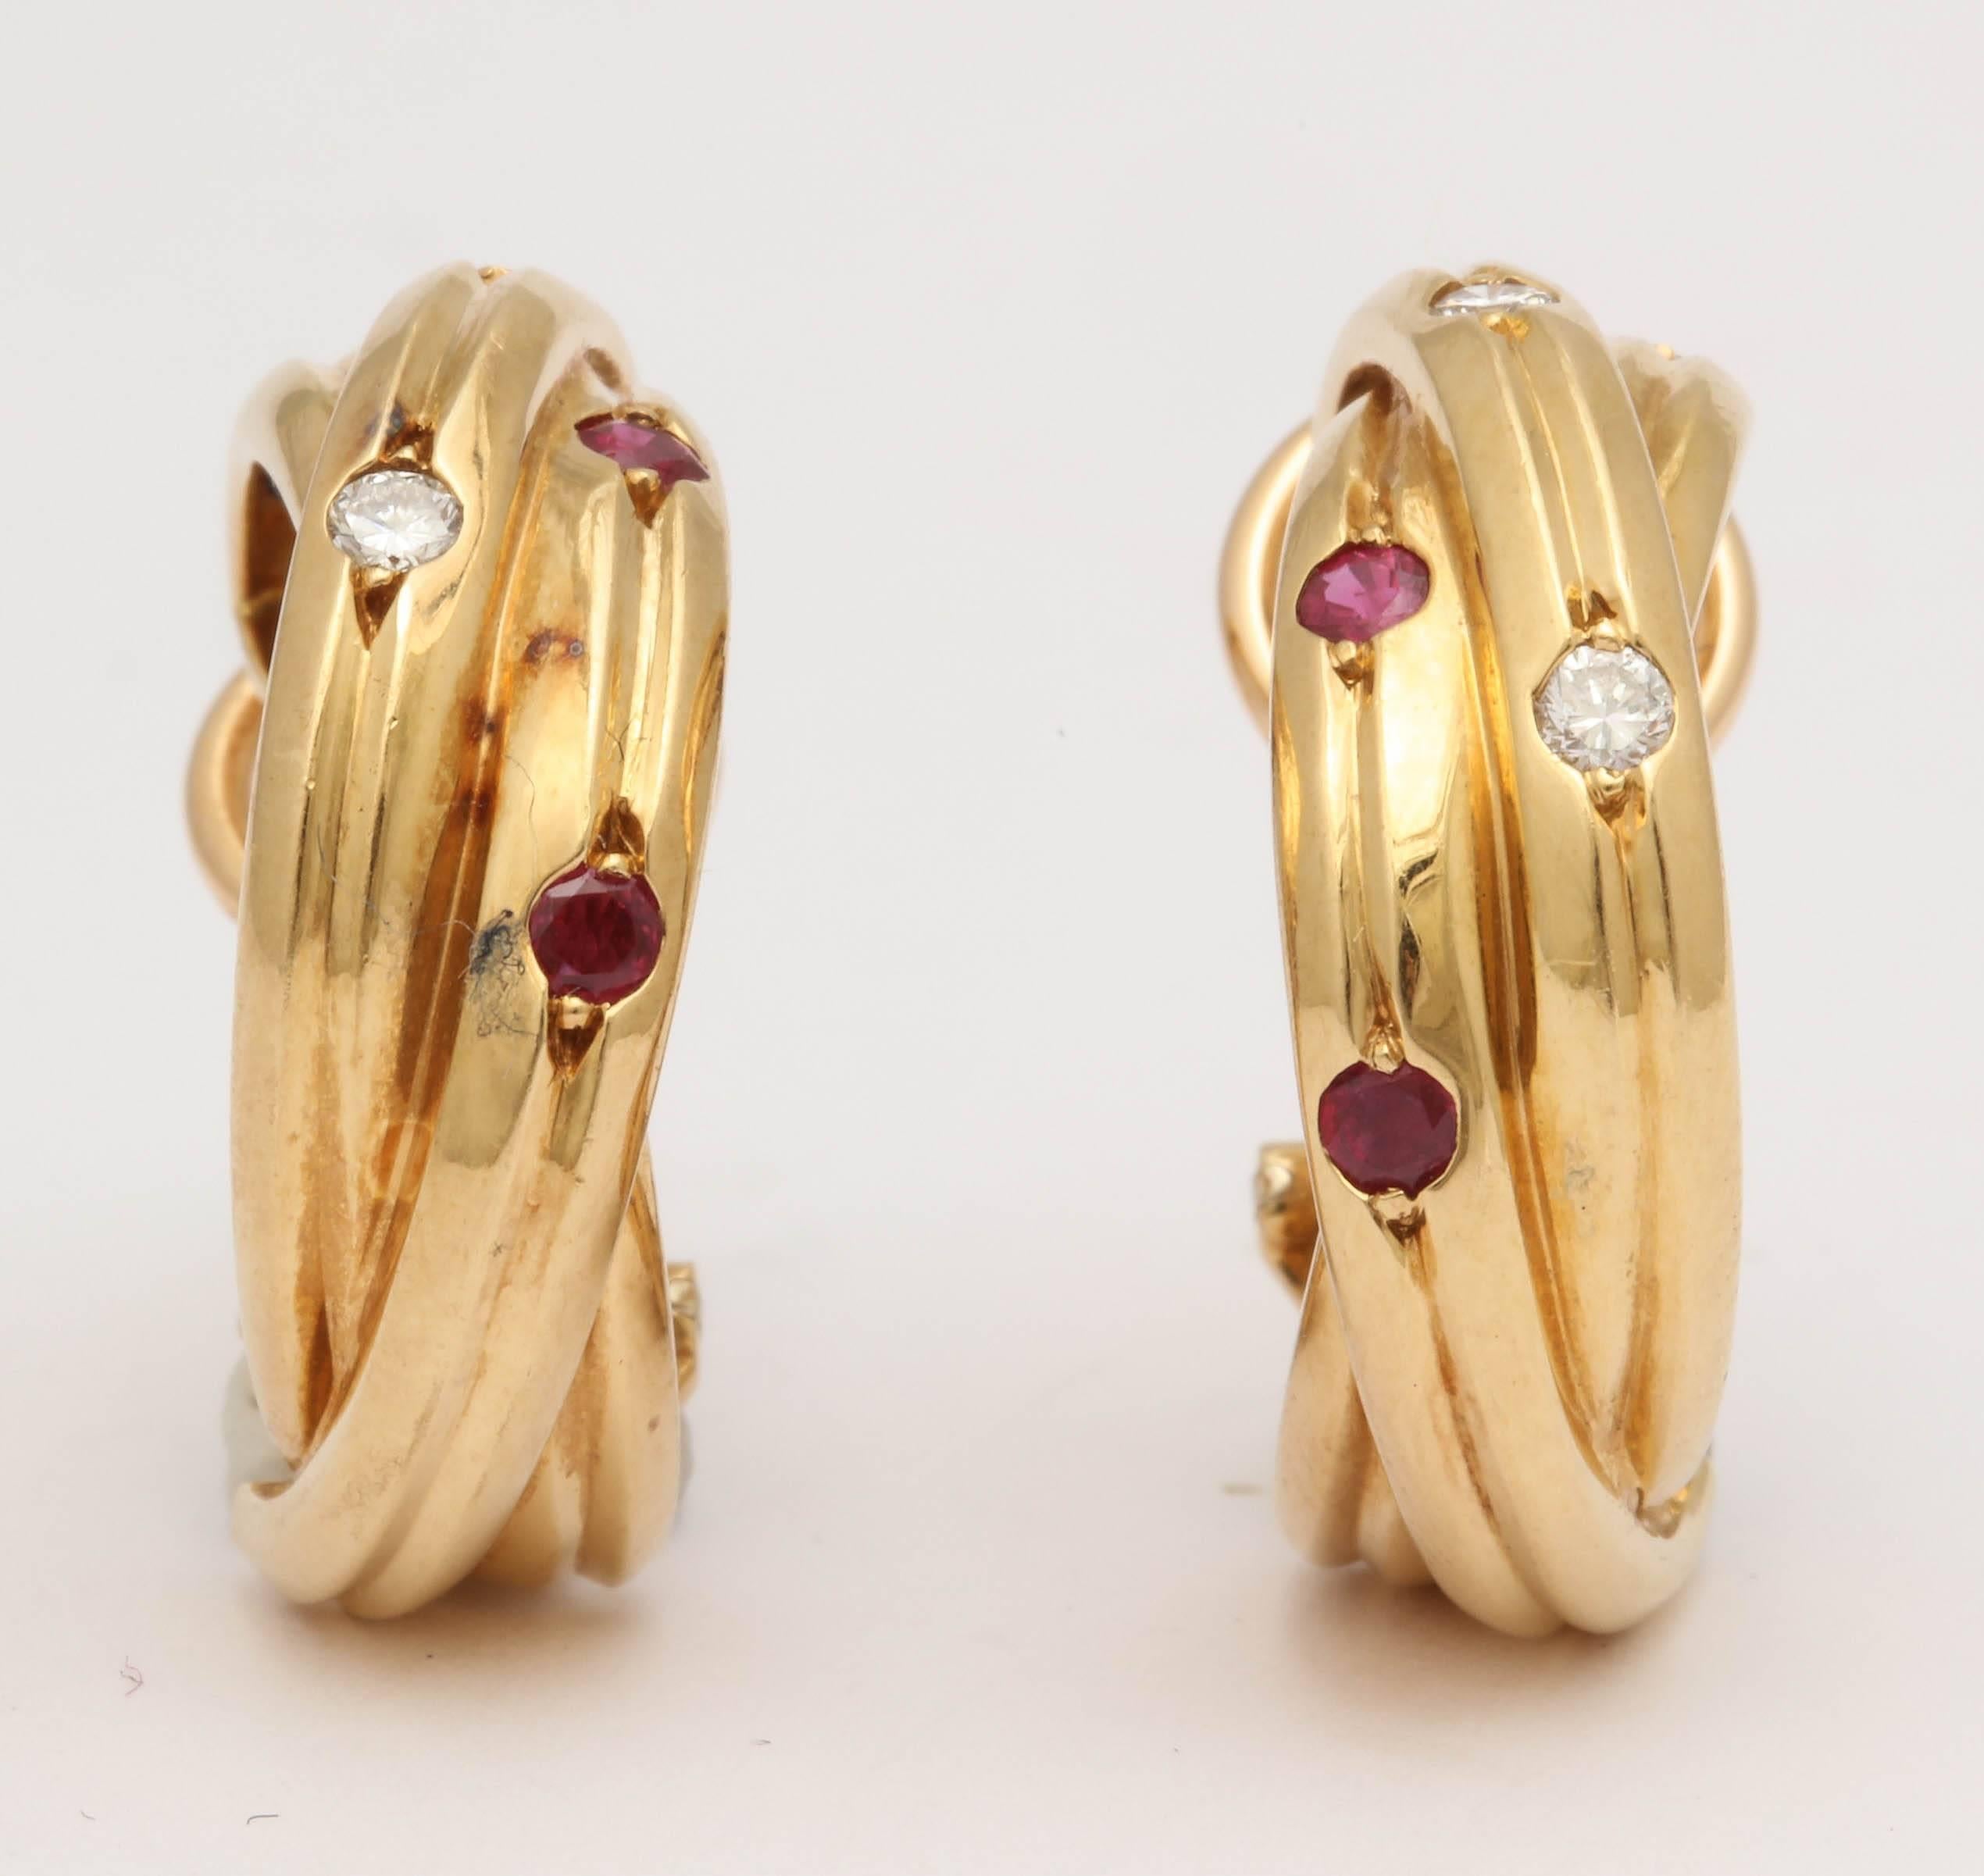 One Pair Of Ladies Triple Hoop Rolling Ring Earclips With Posts Embellished With Four Full cut Diamonds And With Four Faceted Cut Beautiful Color Rubies And Two Beautiful Color Faceted Cut sapphires.NOTE: Posts May Be Removed For Non-Pierced Ears.